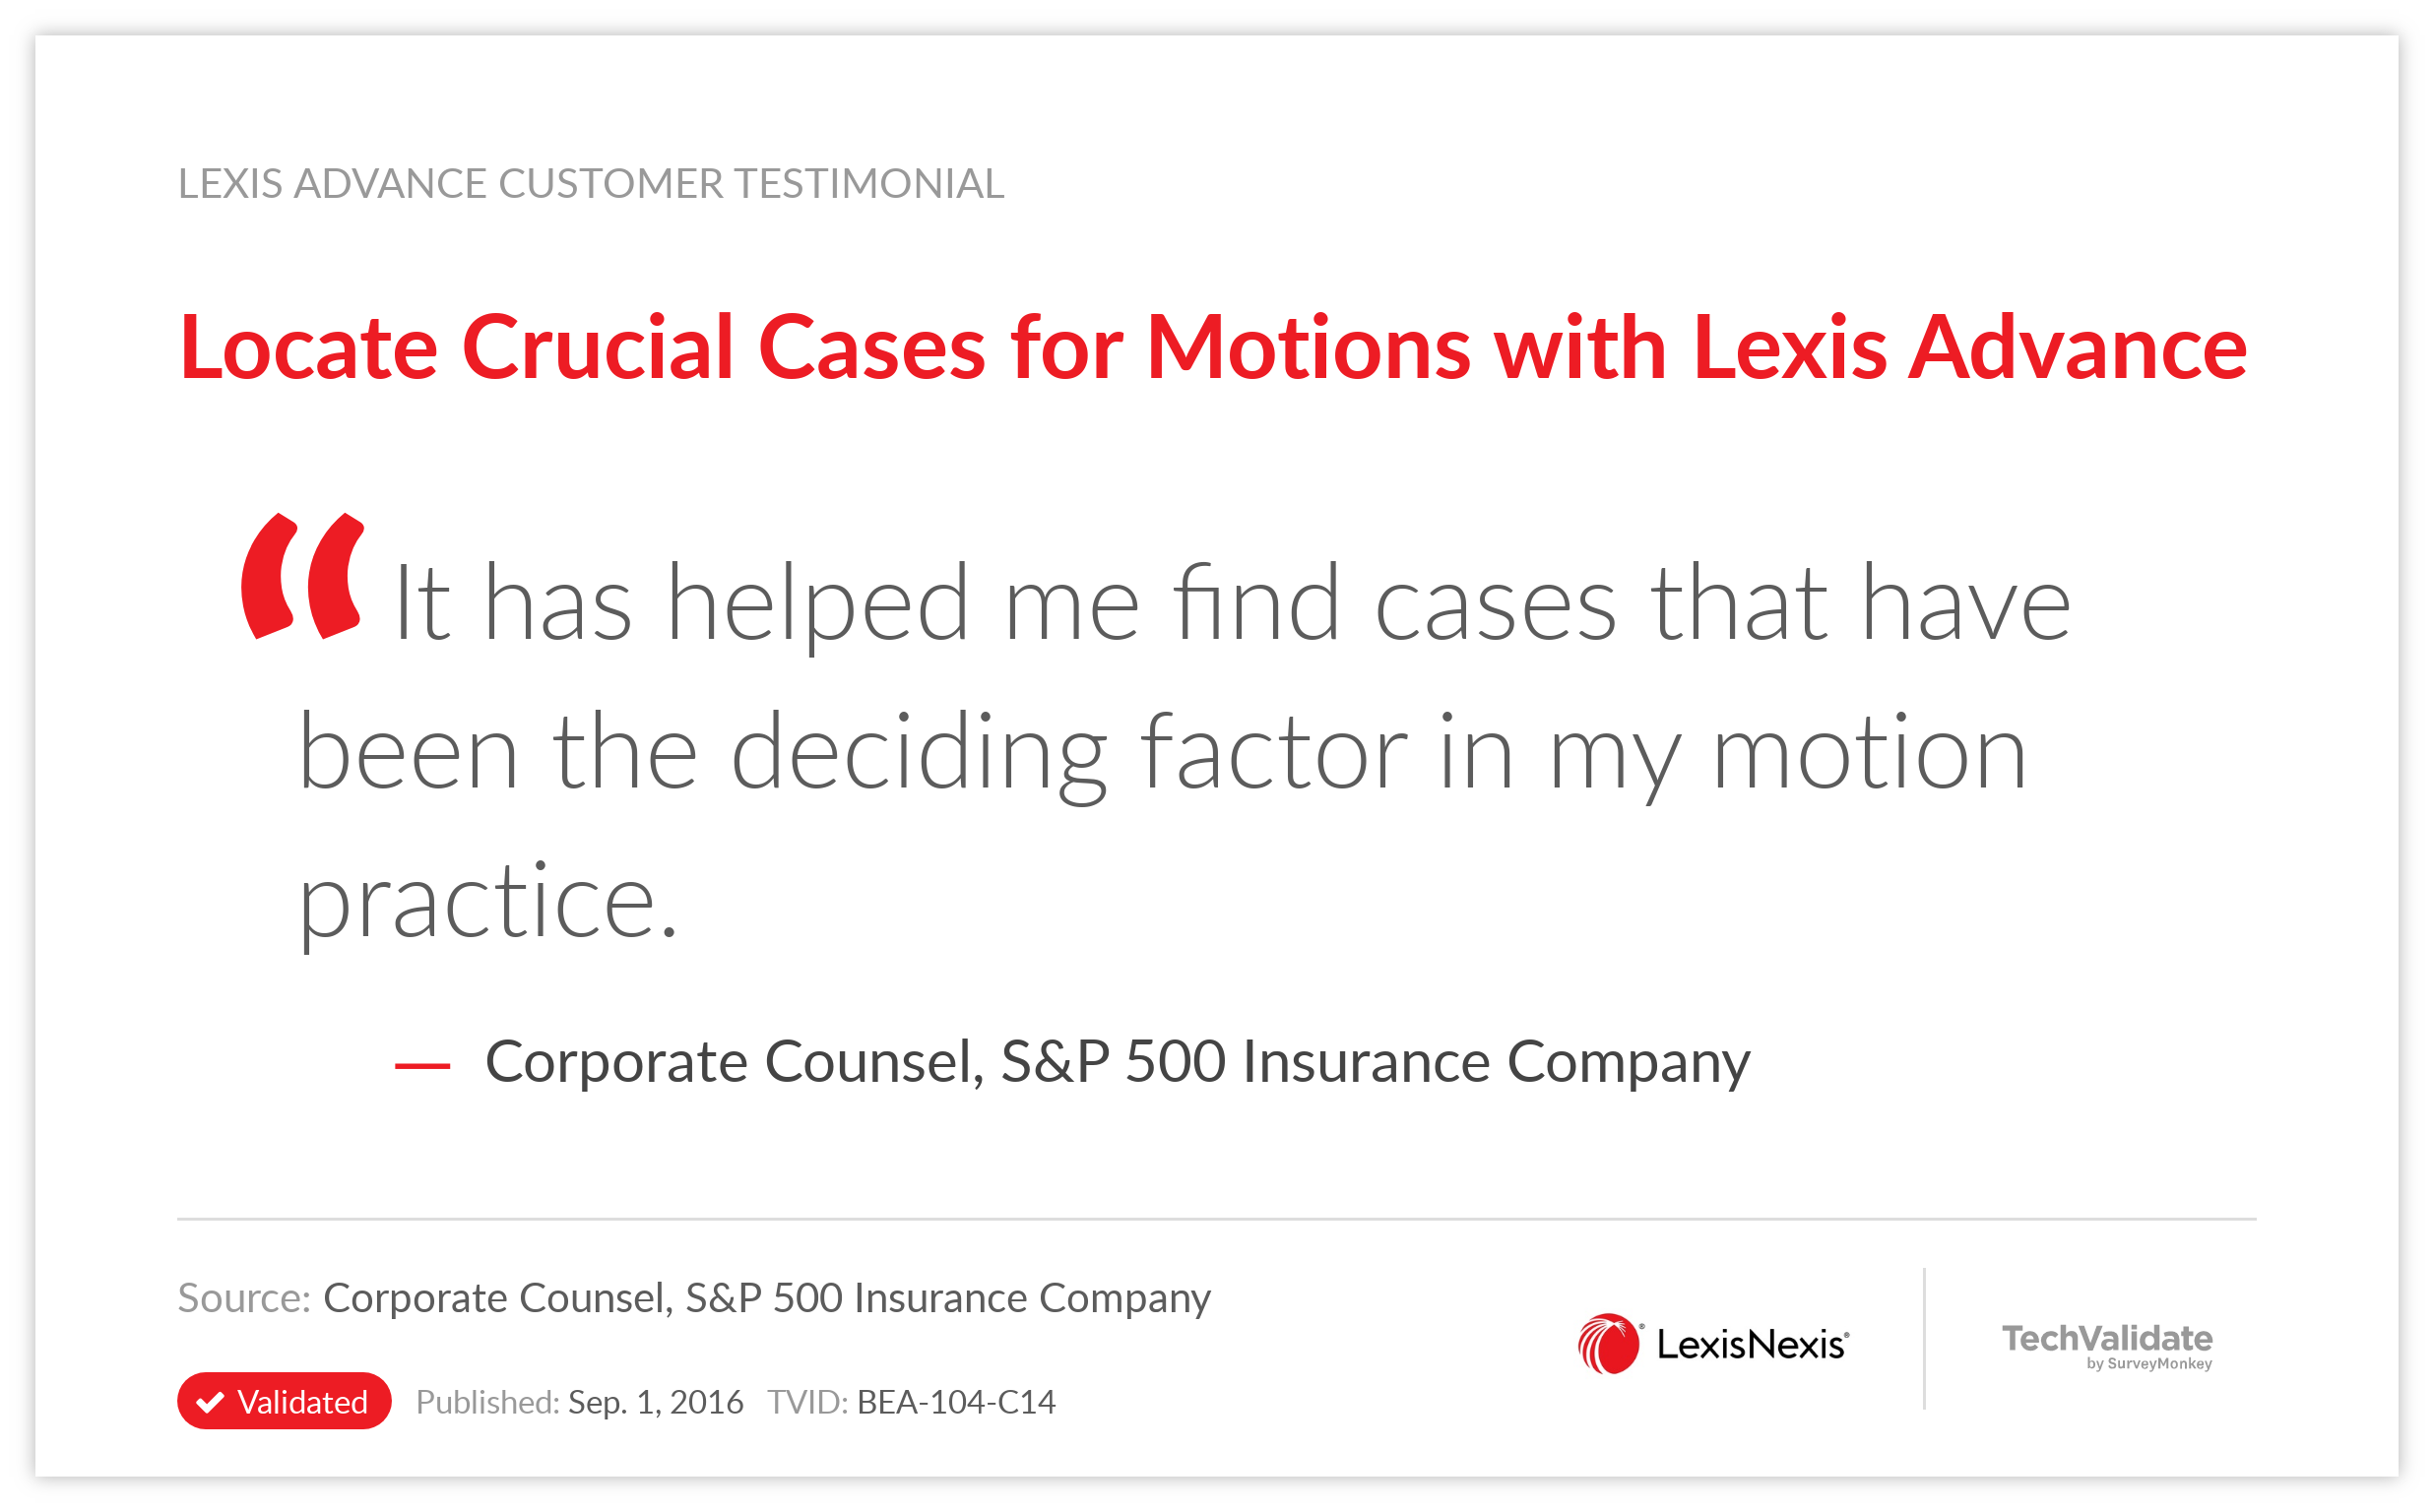 Locate Crucial Cases for Motions with Lexis Advance